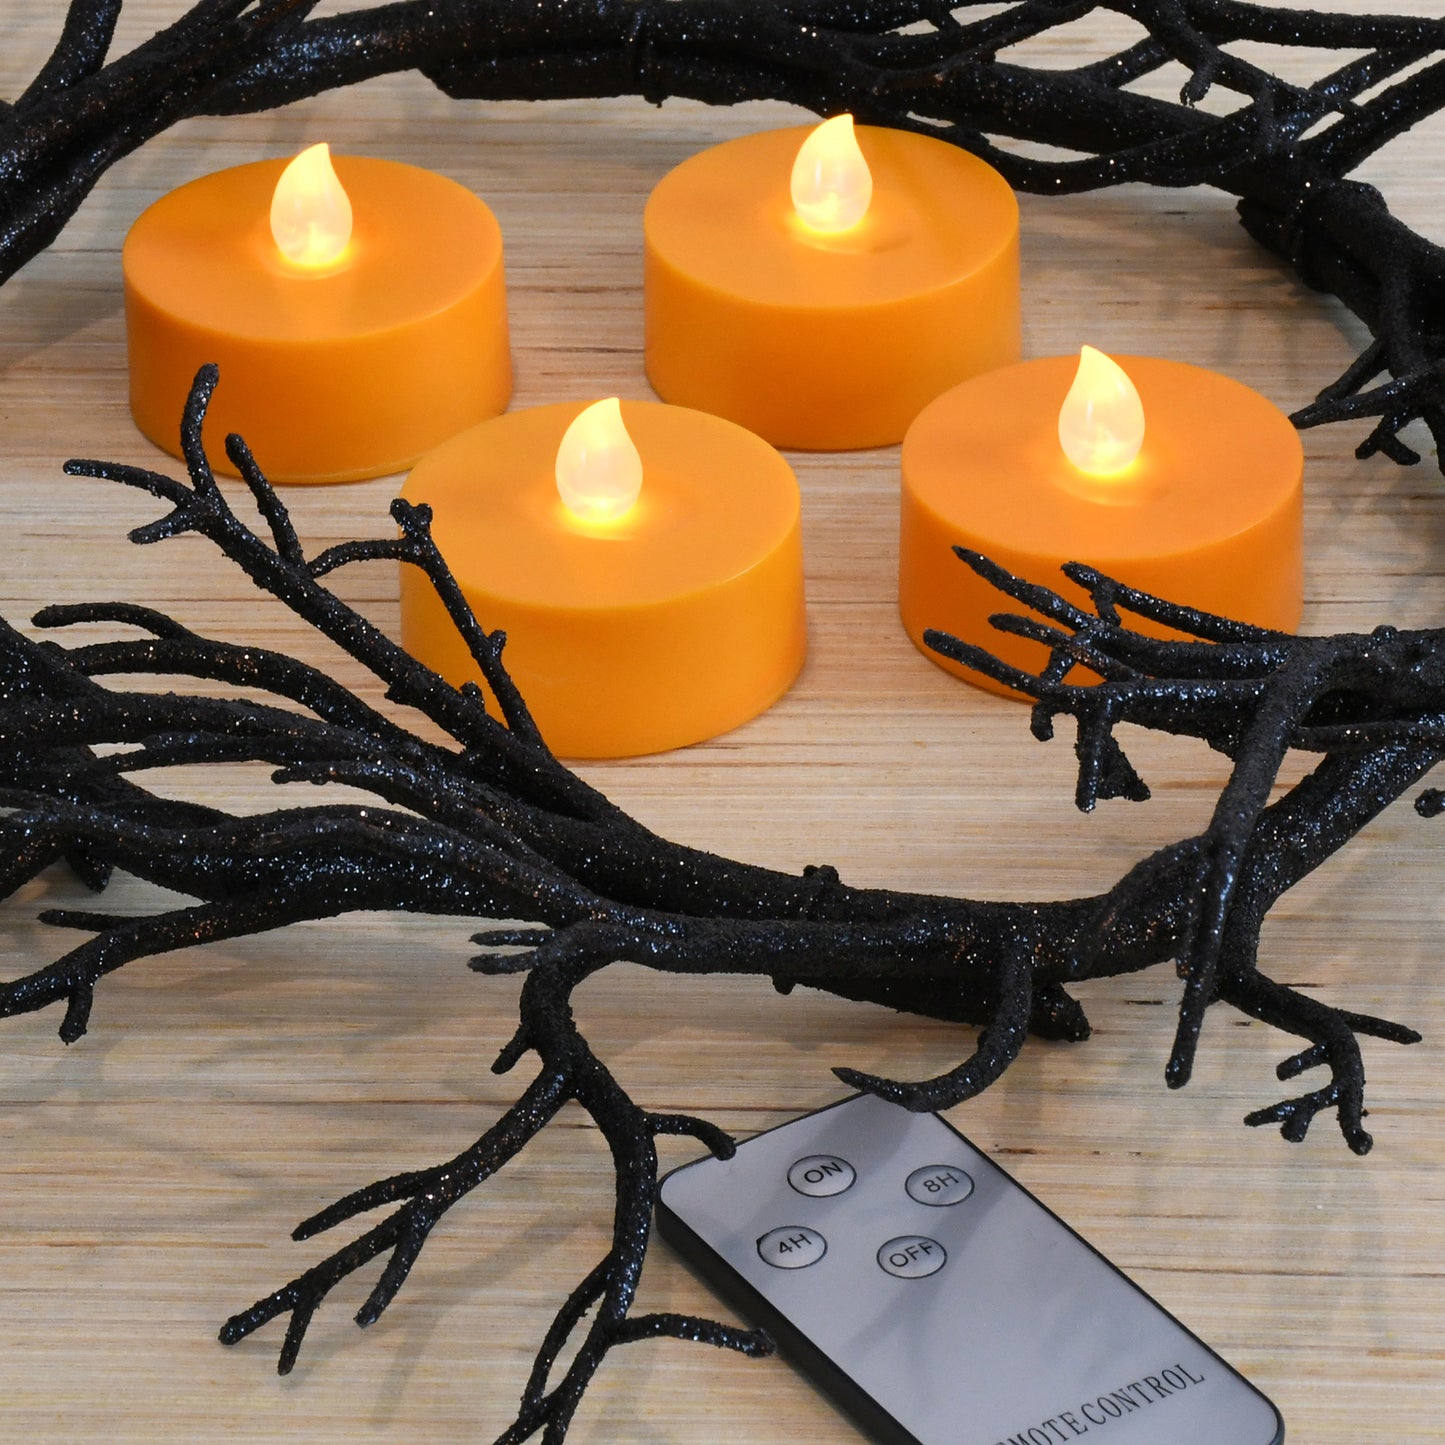 Extra Large Battery Operated Tea Lights with White Lights  and Remote Control - Set of 4 - Orange